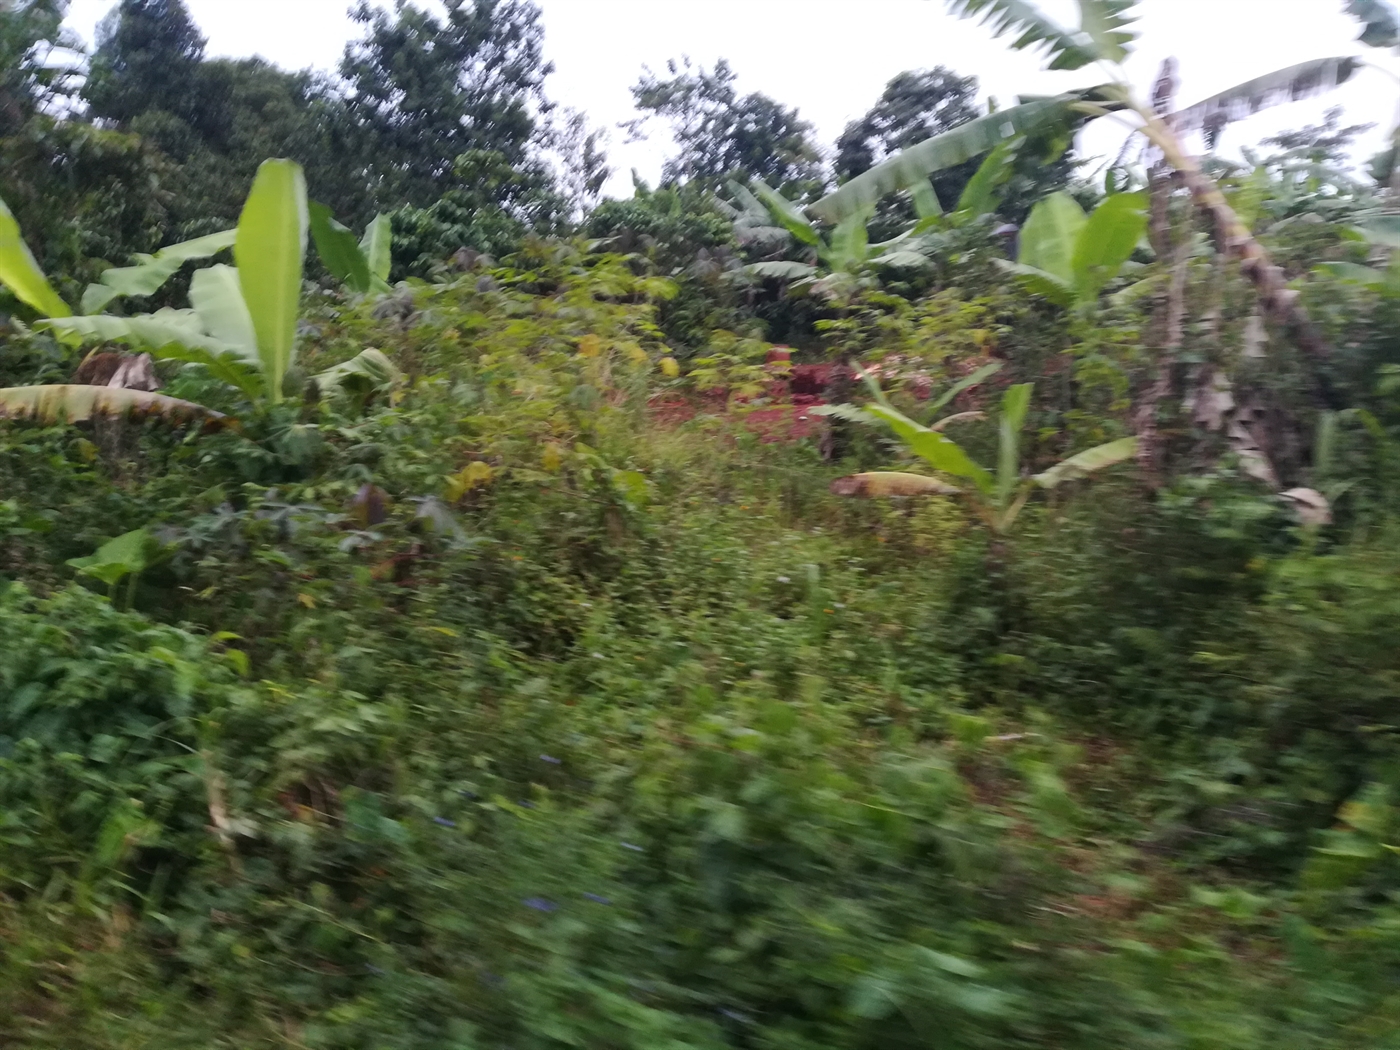 Agricultural Land for sale in Nakisunga Mukono